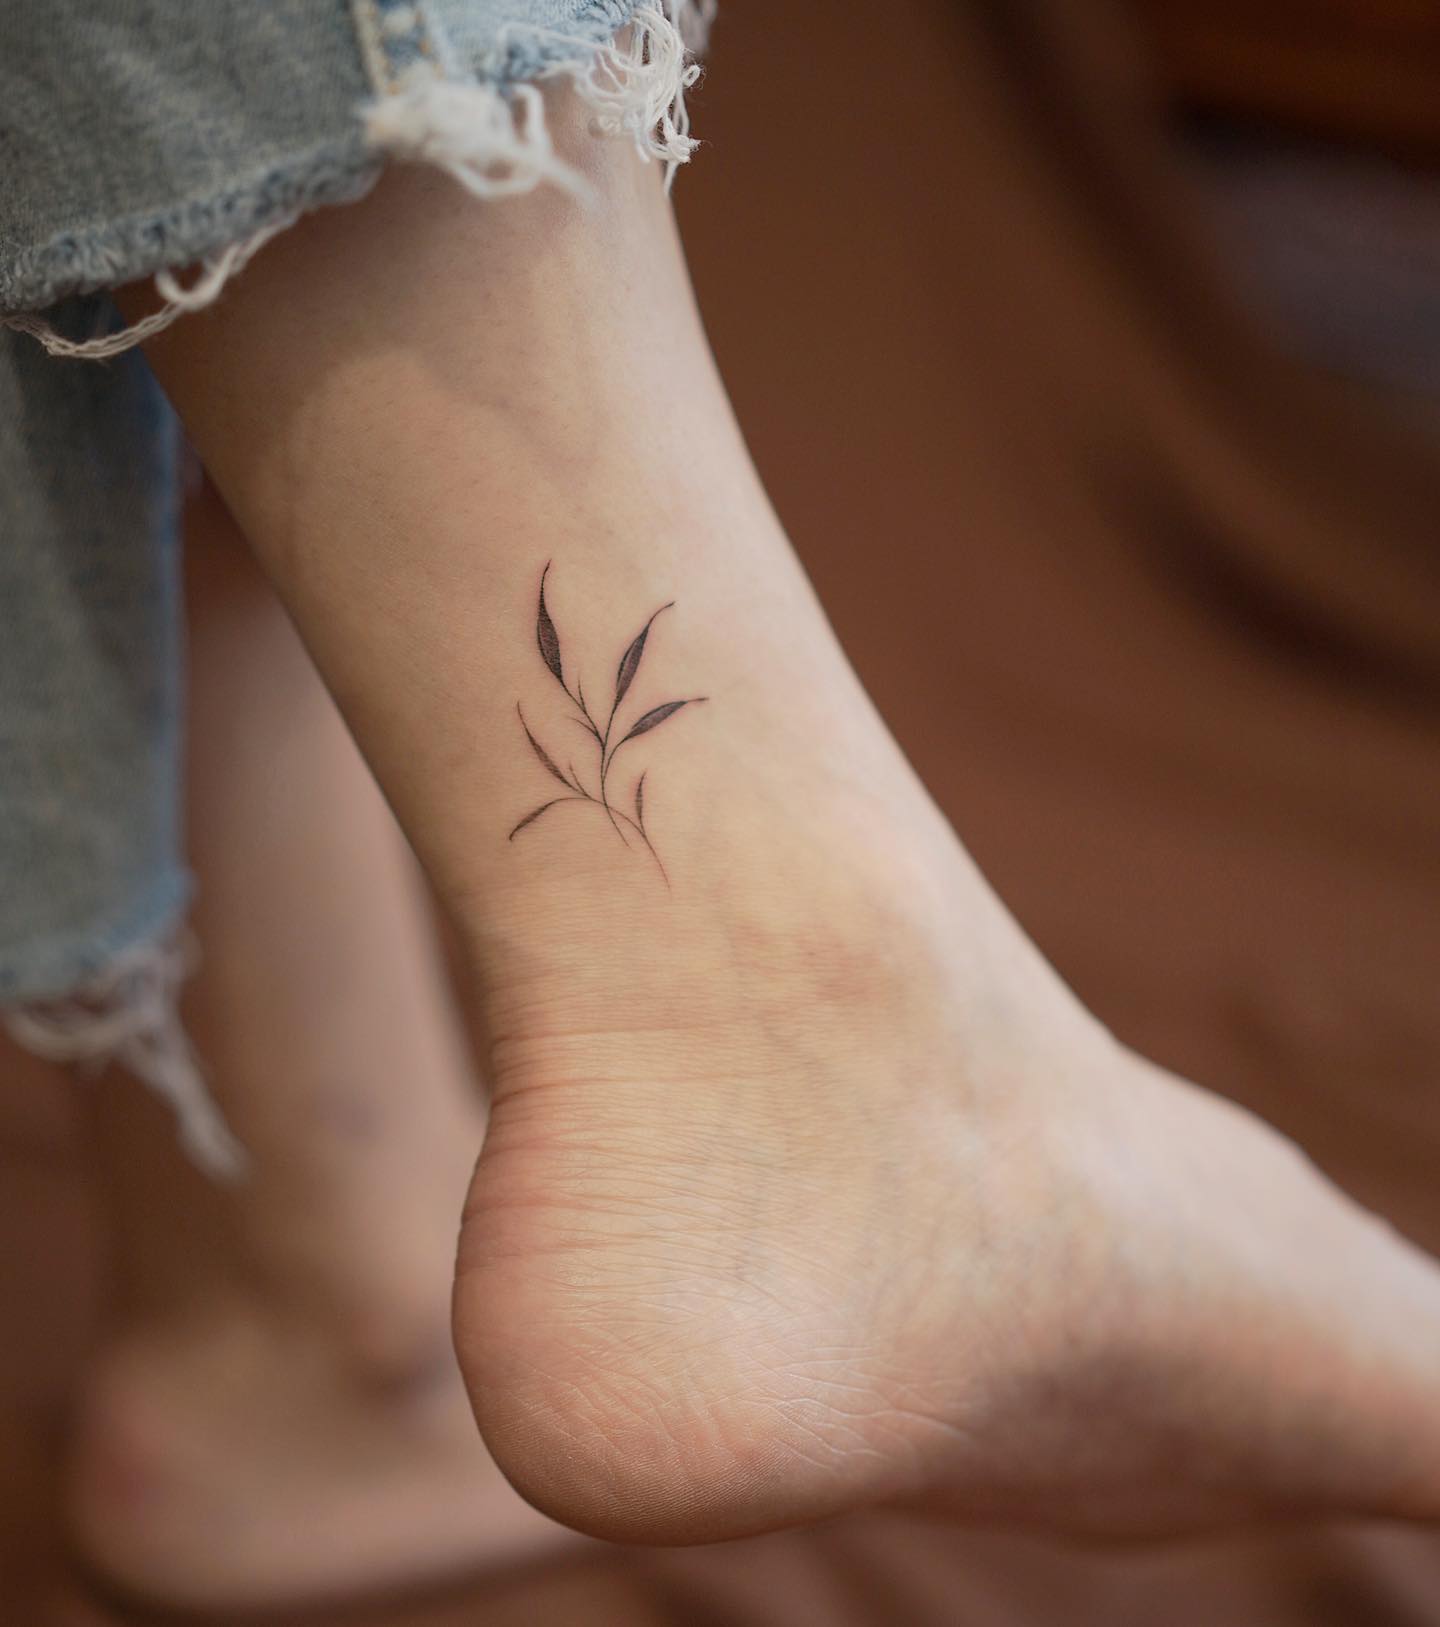 Sometimes all we need is simplicity. Small and minimalist tattoos offer a great look, so why don't you get a minimalist leaves tattoo? Your ankle will look amazing with it.